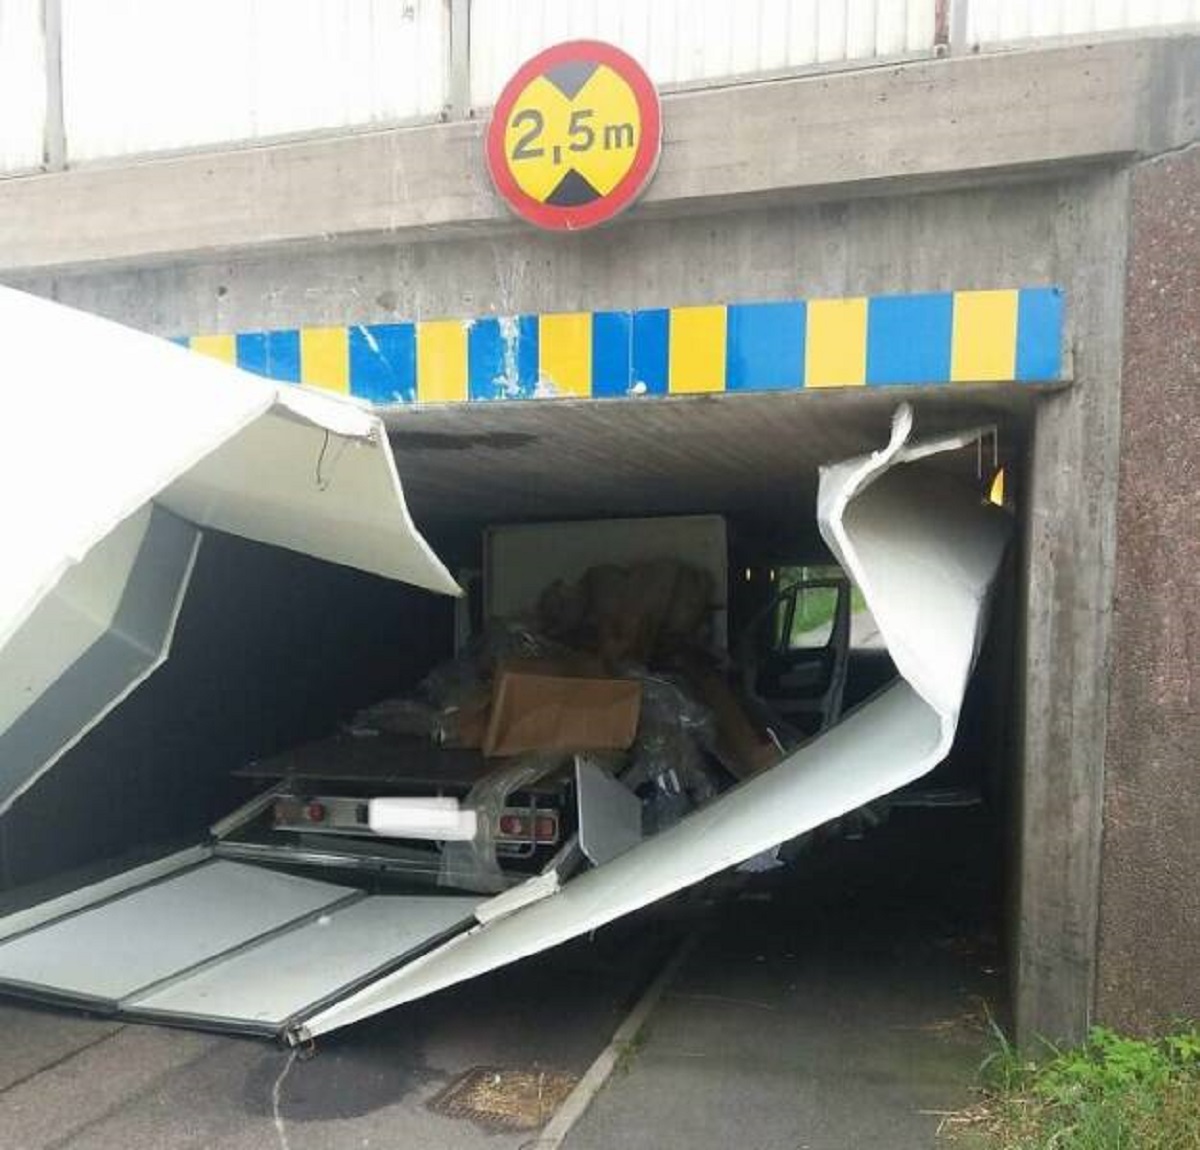 "My Colleague Did Not Calculate The Height Of The Truck, And How Low The Bridge Was"